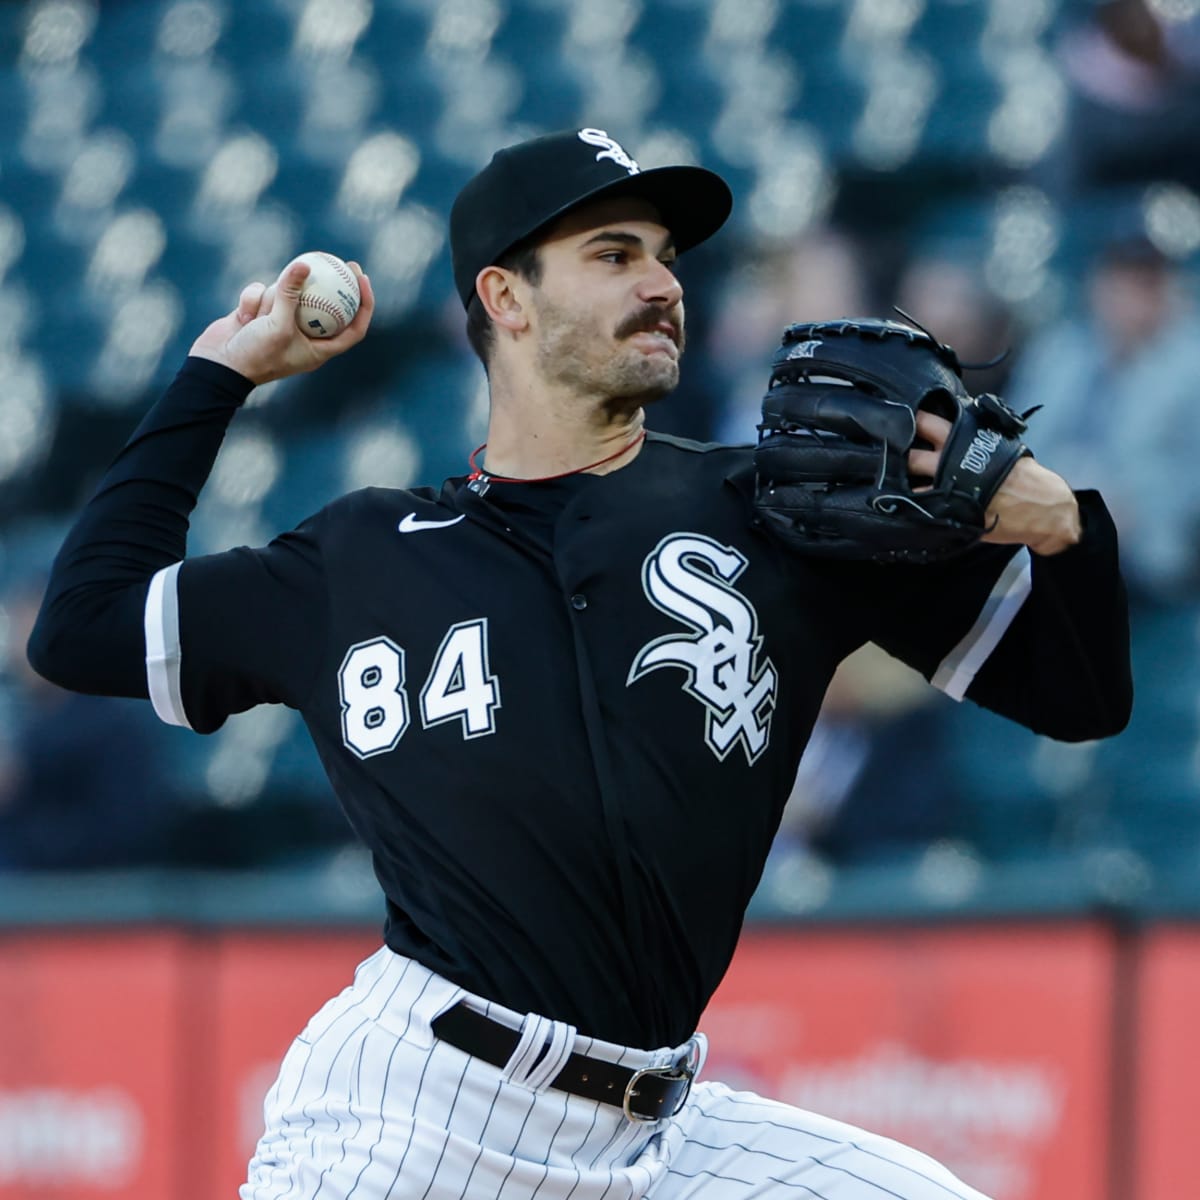 Starter Dylan Cease of the Chicago White Sox pitches in the first